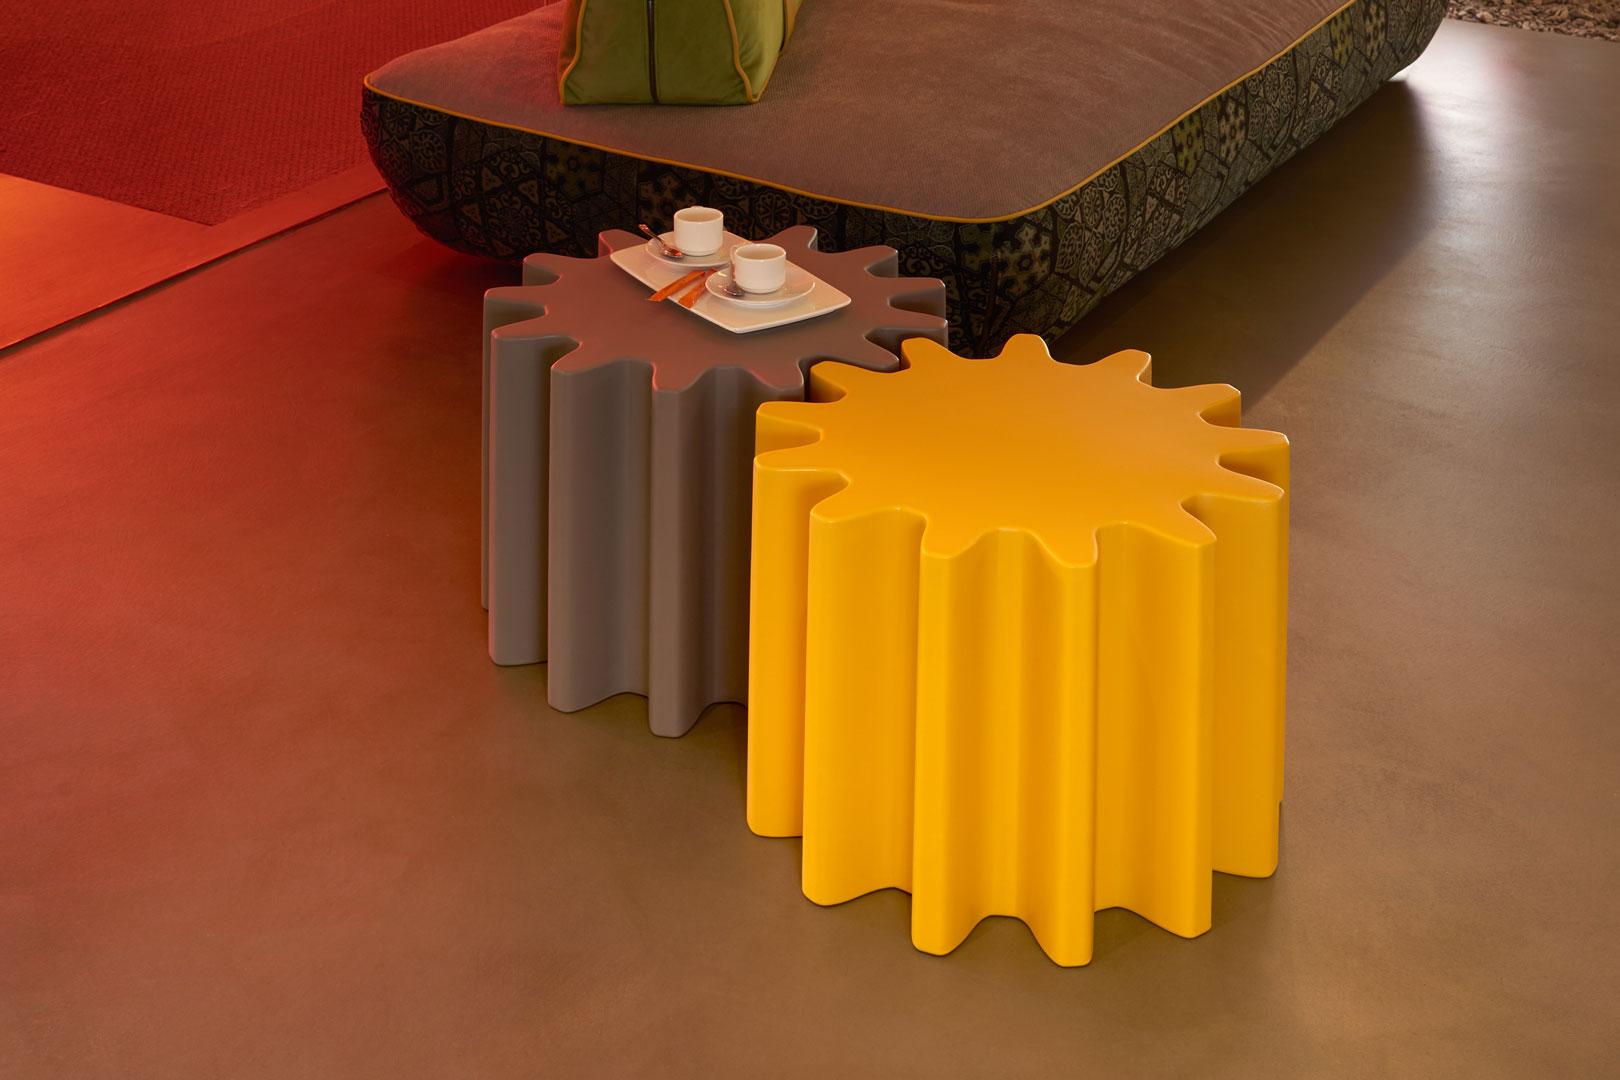 Saffron Yellow Gear Stool by Anastasia Ivanyuk
Dimensions: D 55 x W 55 x H 43 cm. Seat Height: 43 cm.
Materials: Polyethylene.
Weight: 6 kg.

Available in different color options. This product is suitable for indoor and outdoor use. Available in